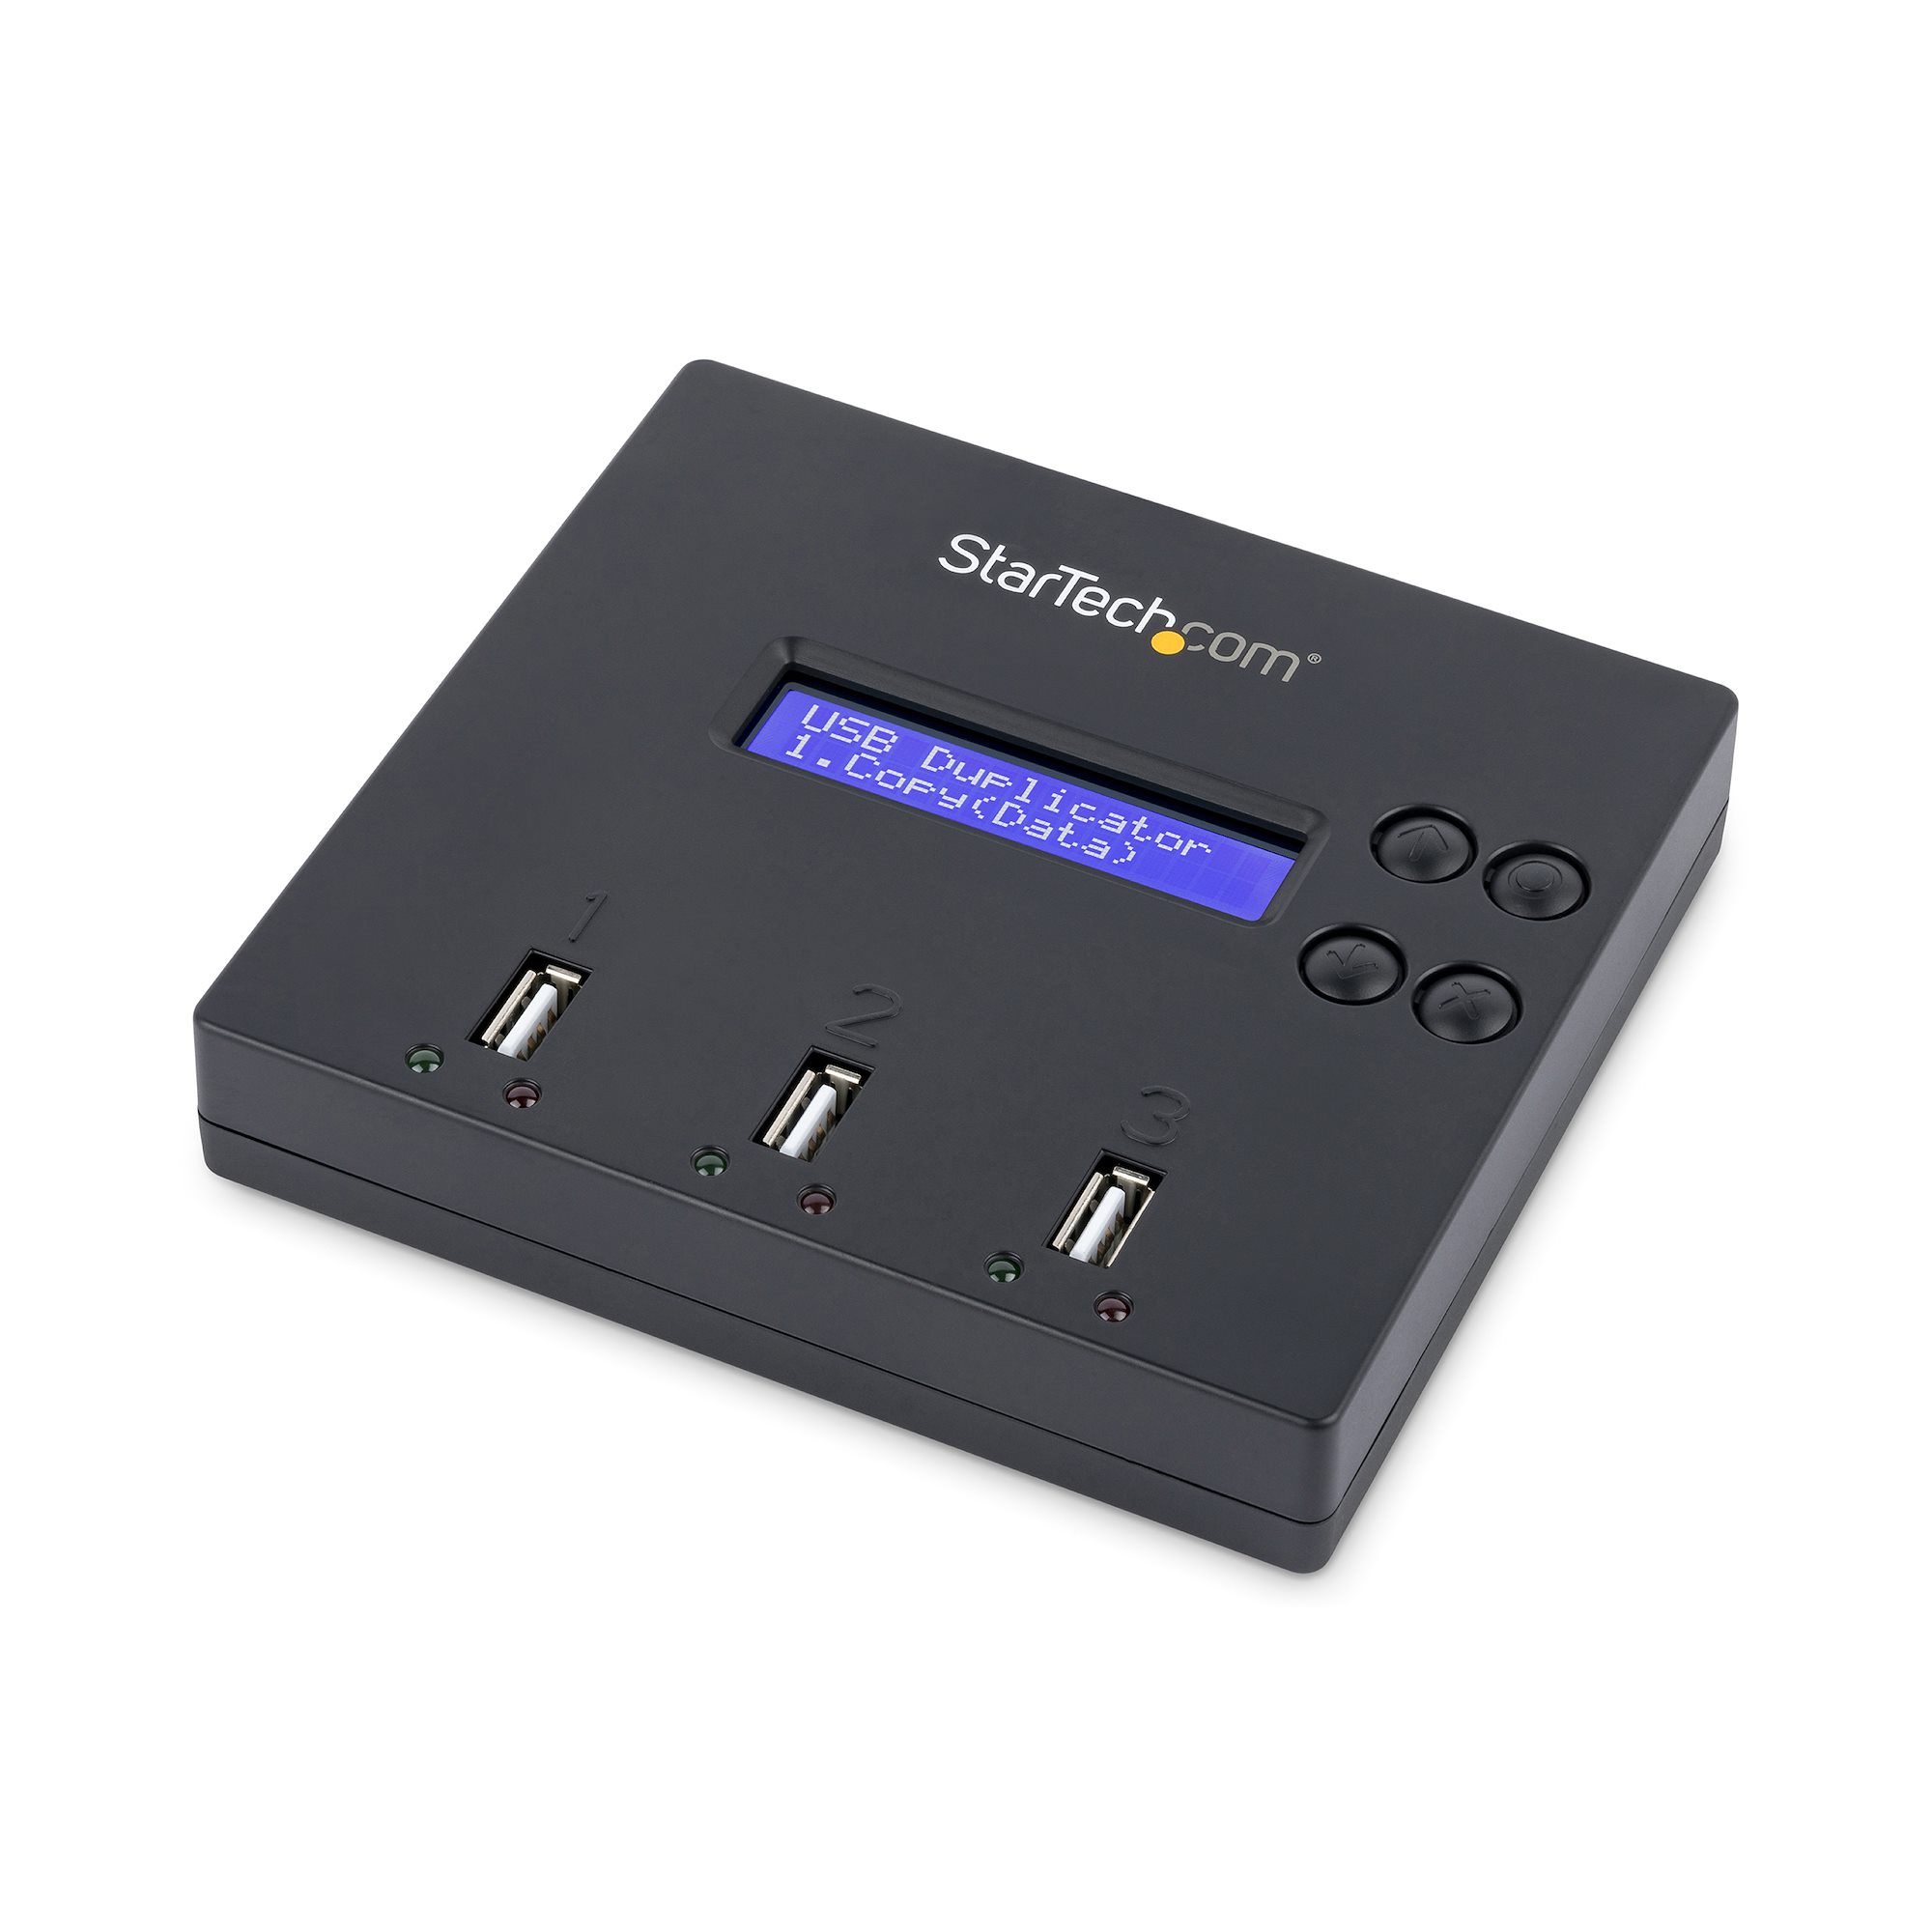 Standalone 1 to 2 USB Thumb Drive Duplicator and Eraser, Multiple USB Flash  Drive Copier, System and File and Whole-Drive Copy at 1.5 GB/min, Single